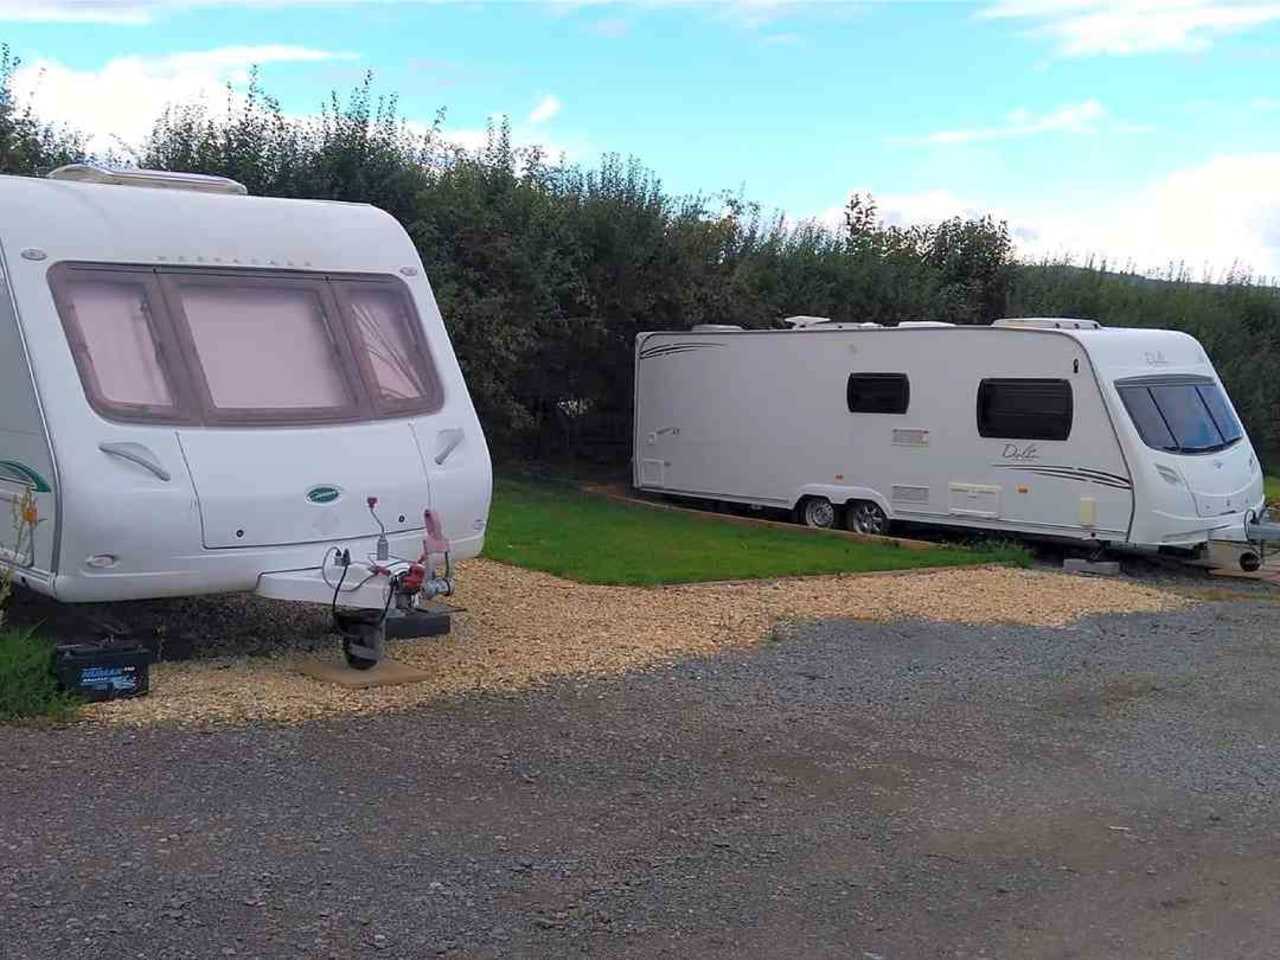 View of parked caravan with hitch at the front